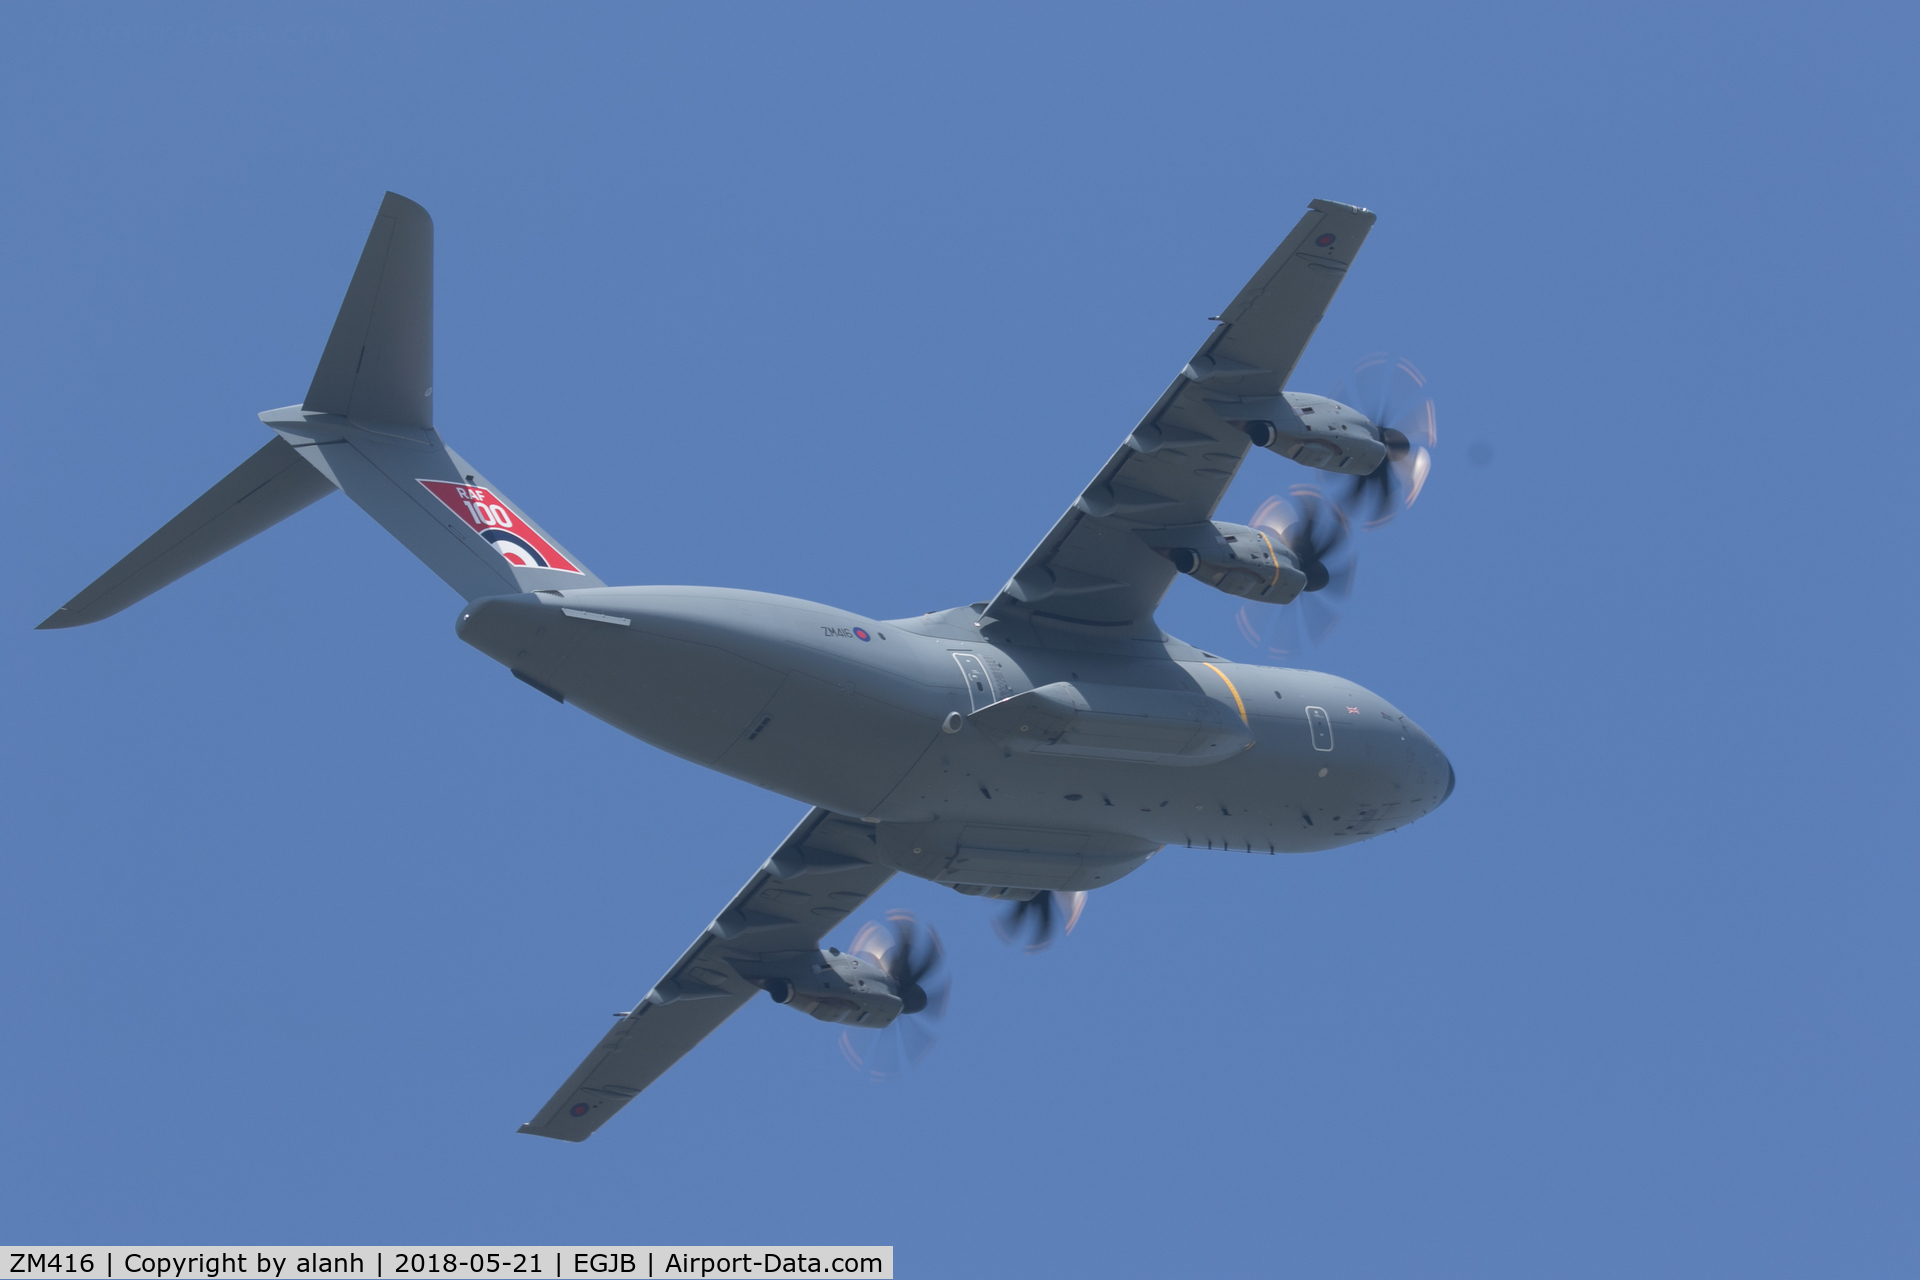 ZM416, 2017 Airbus A400M Atlas C.1 C/N 058, Climbing out from a practice approach at Guernsey, with prominent RAF 100 fin flash